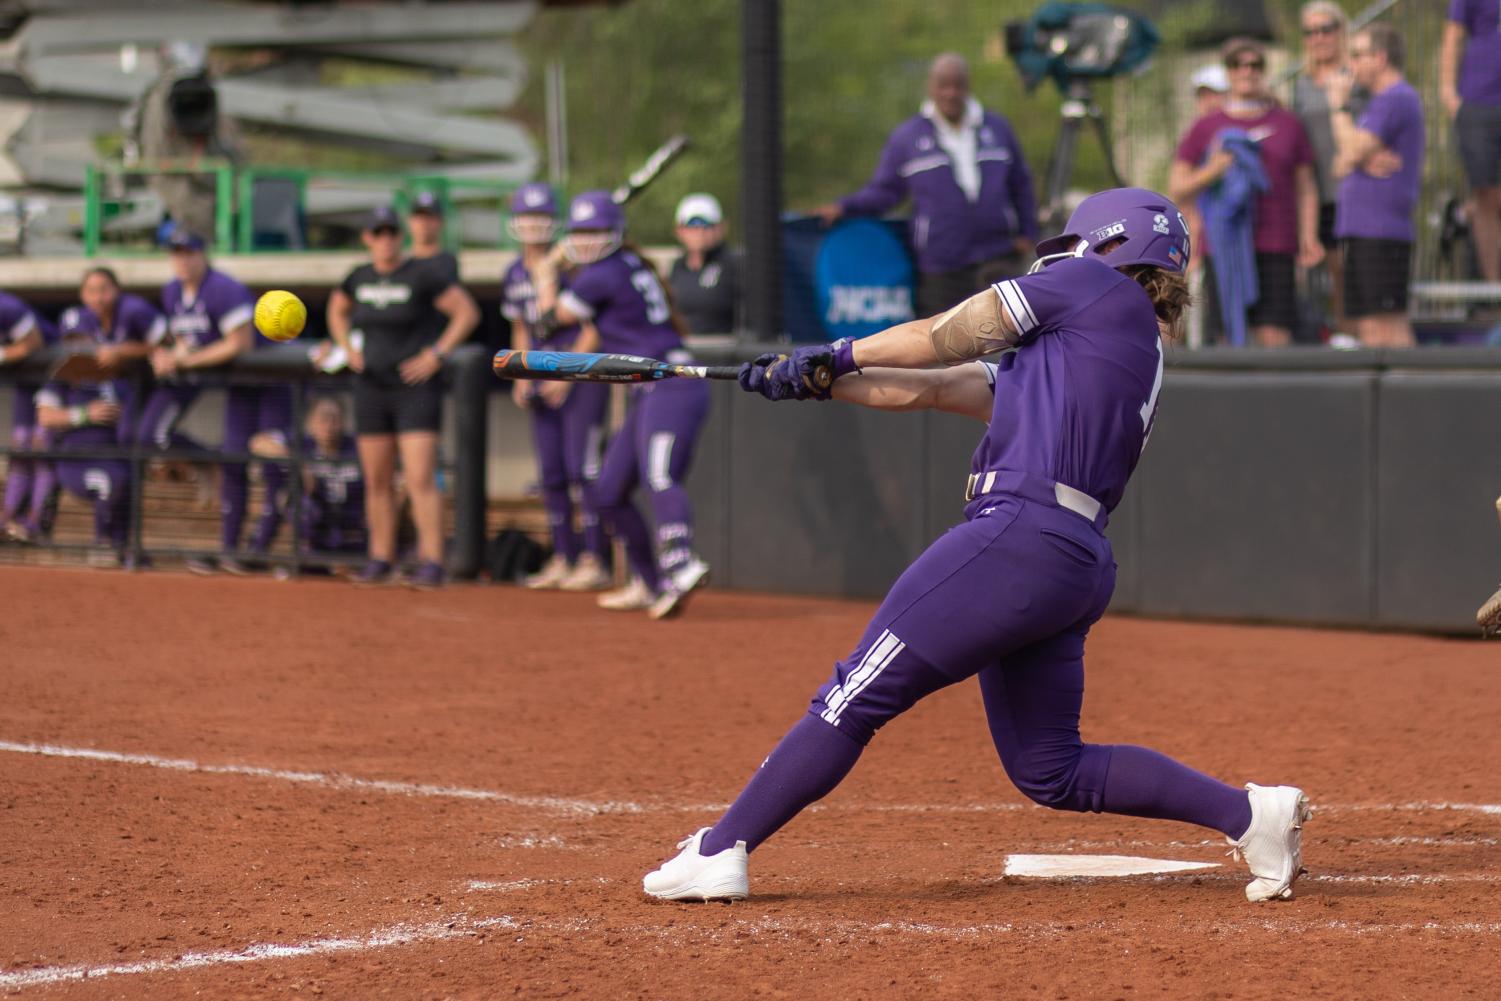 A player in a purple jersey swings and strikes a softball with a bat.